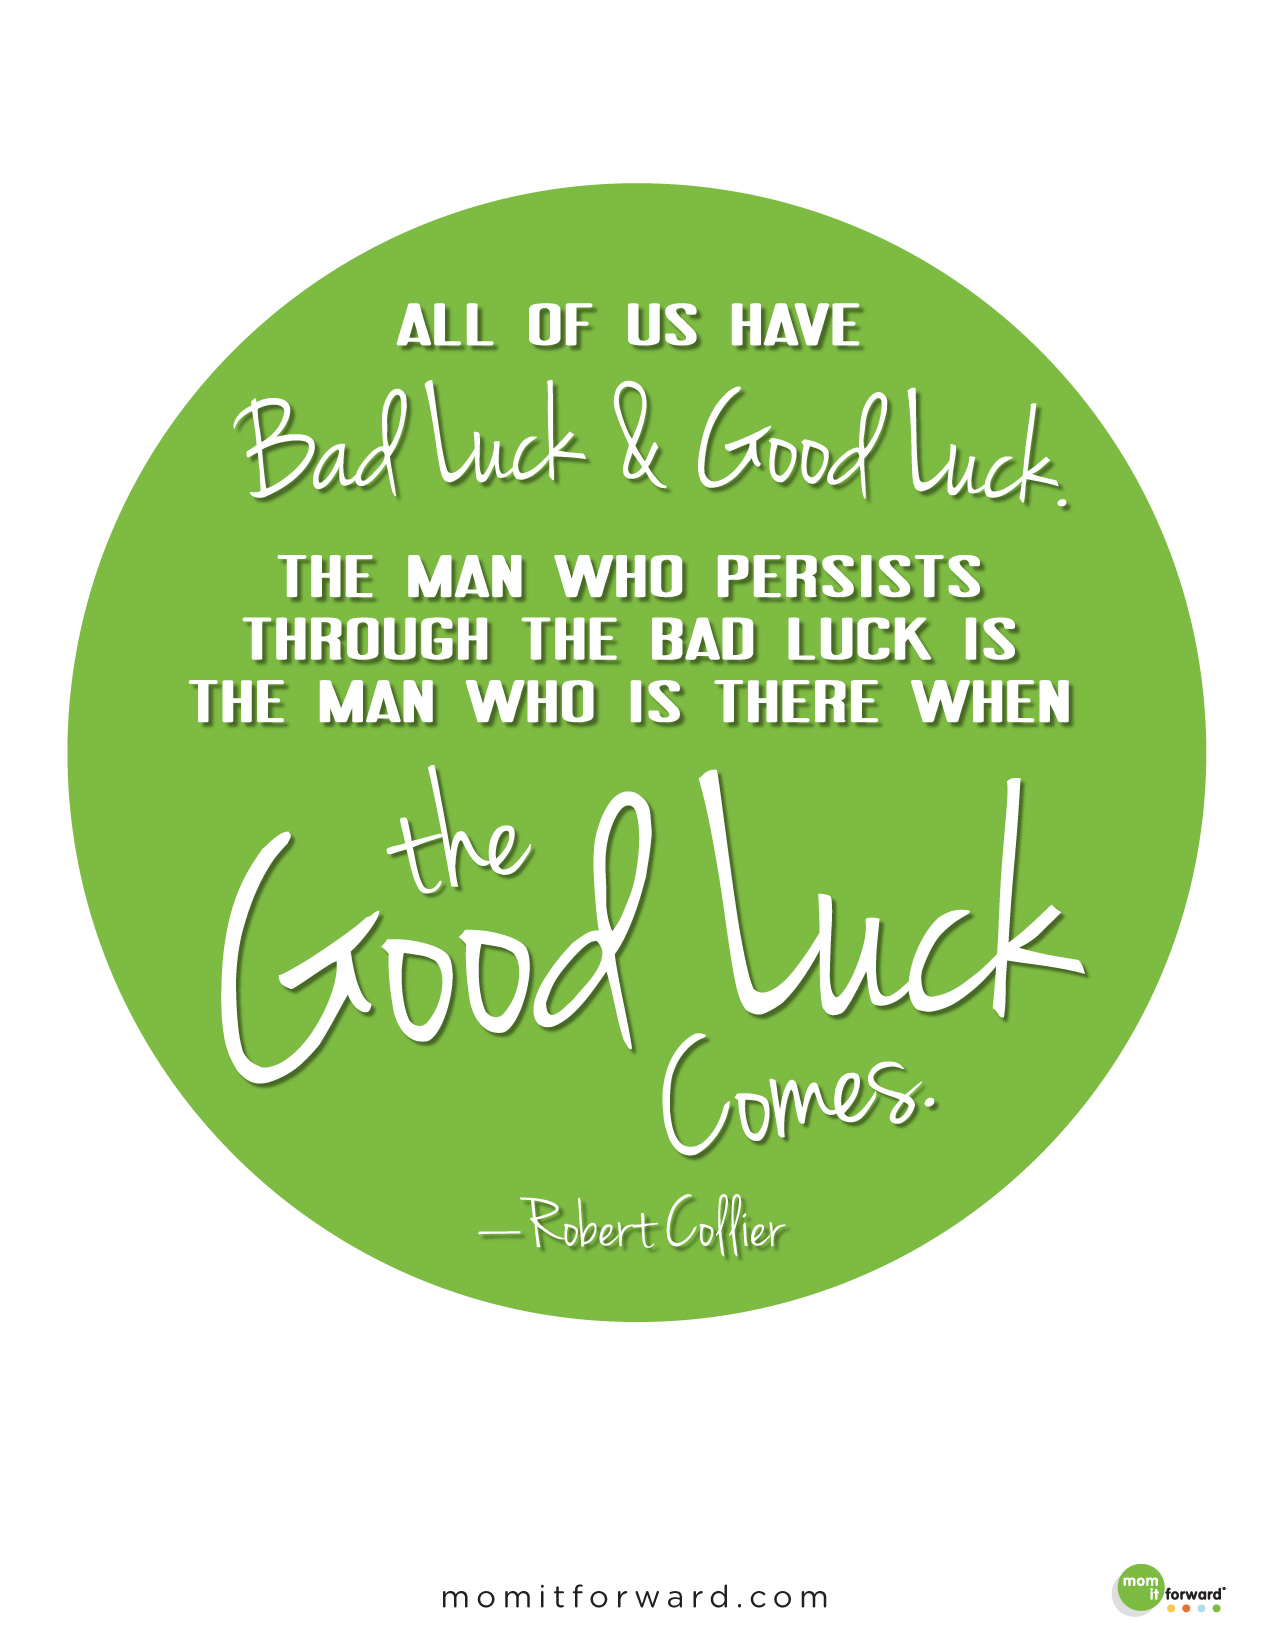 famous quotes about luck